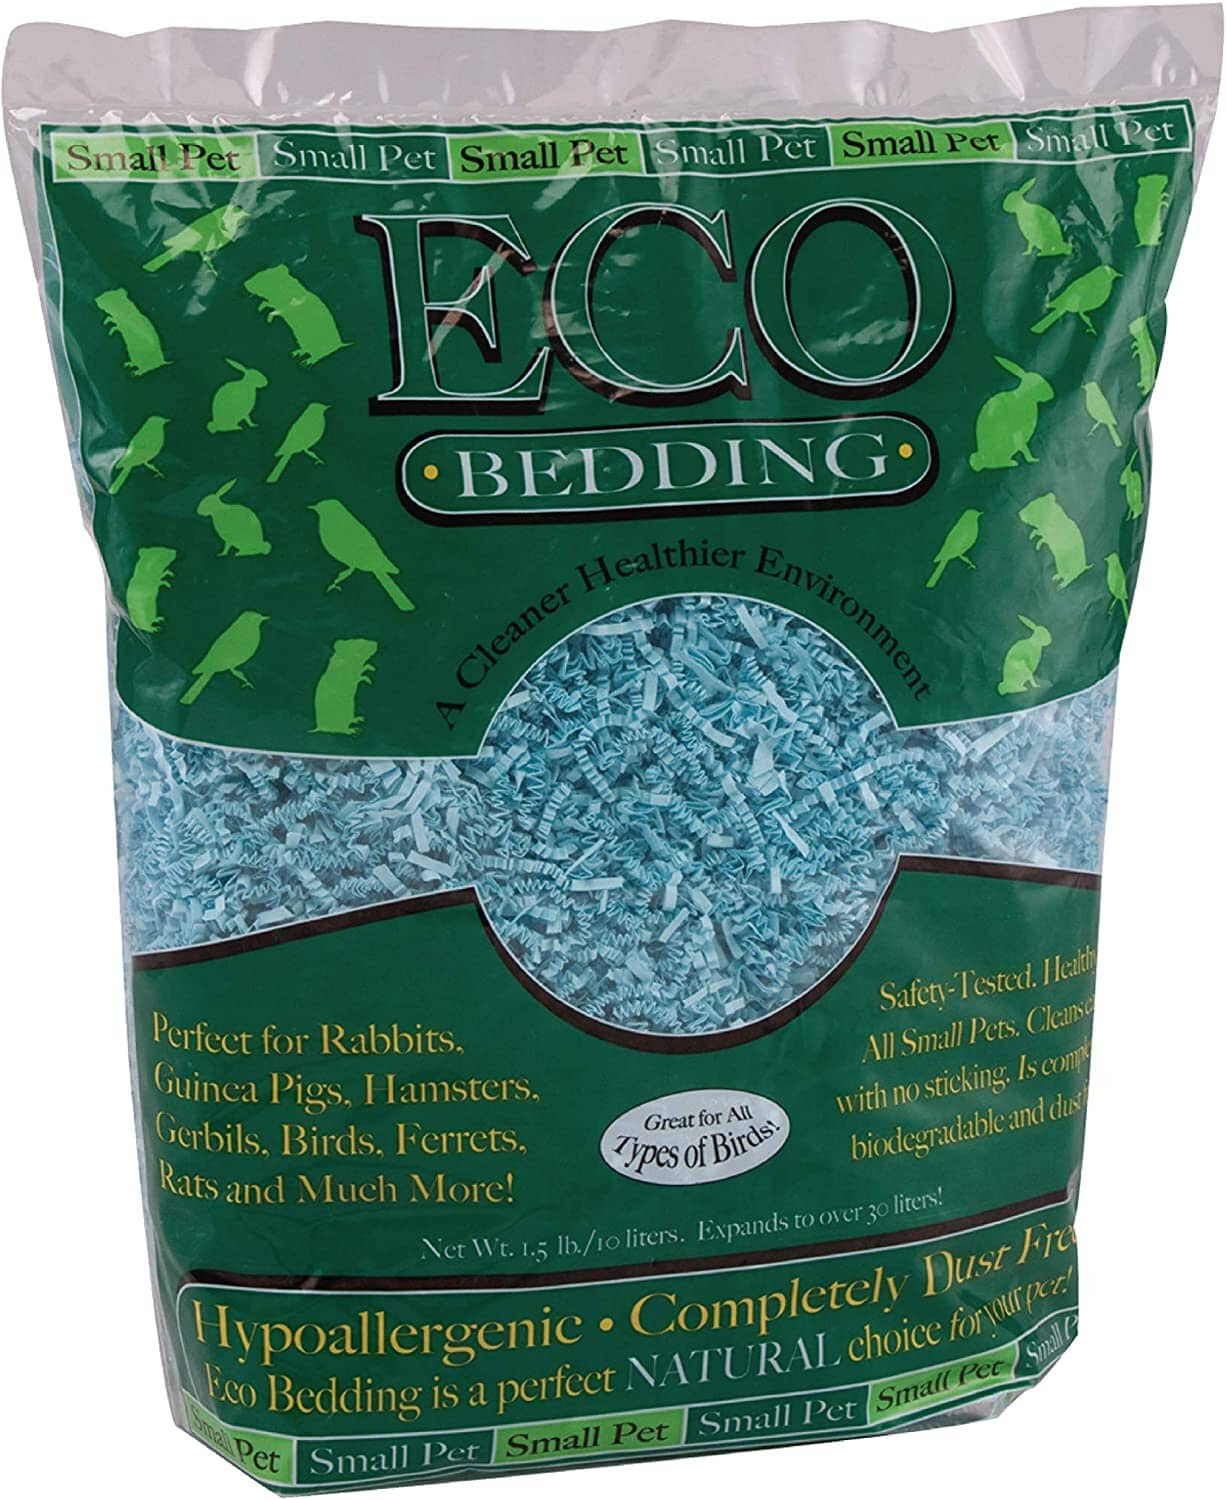 Eco Bedding for Small Pets - Blue - 1.5 Lbs  